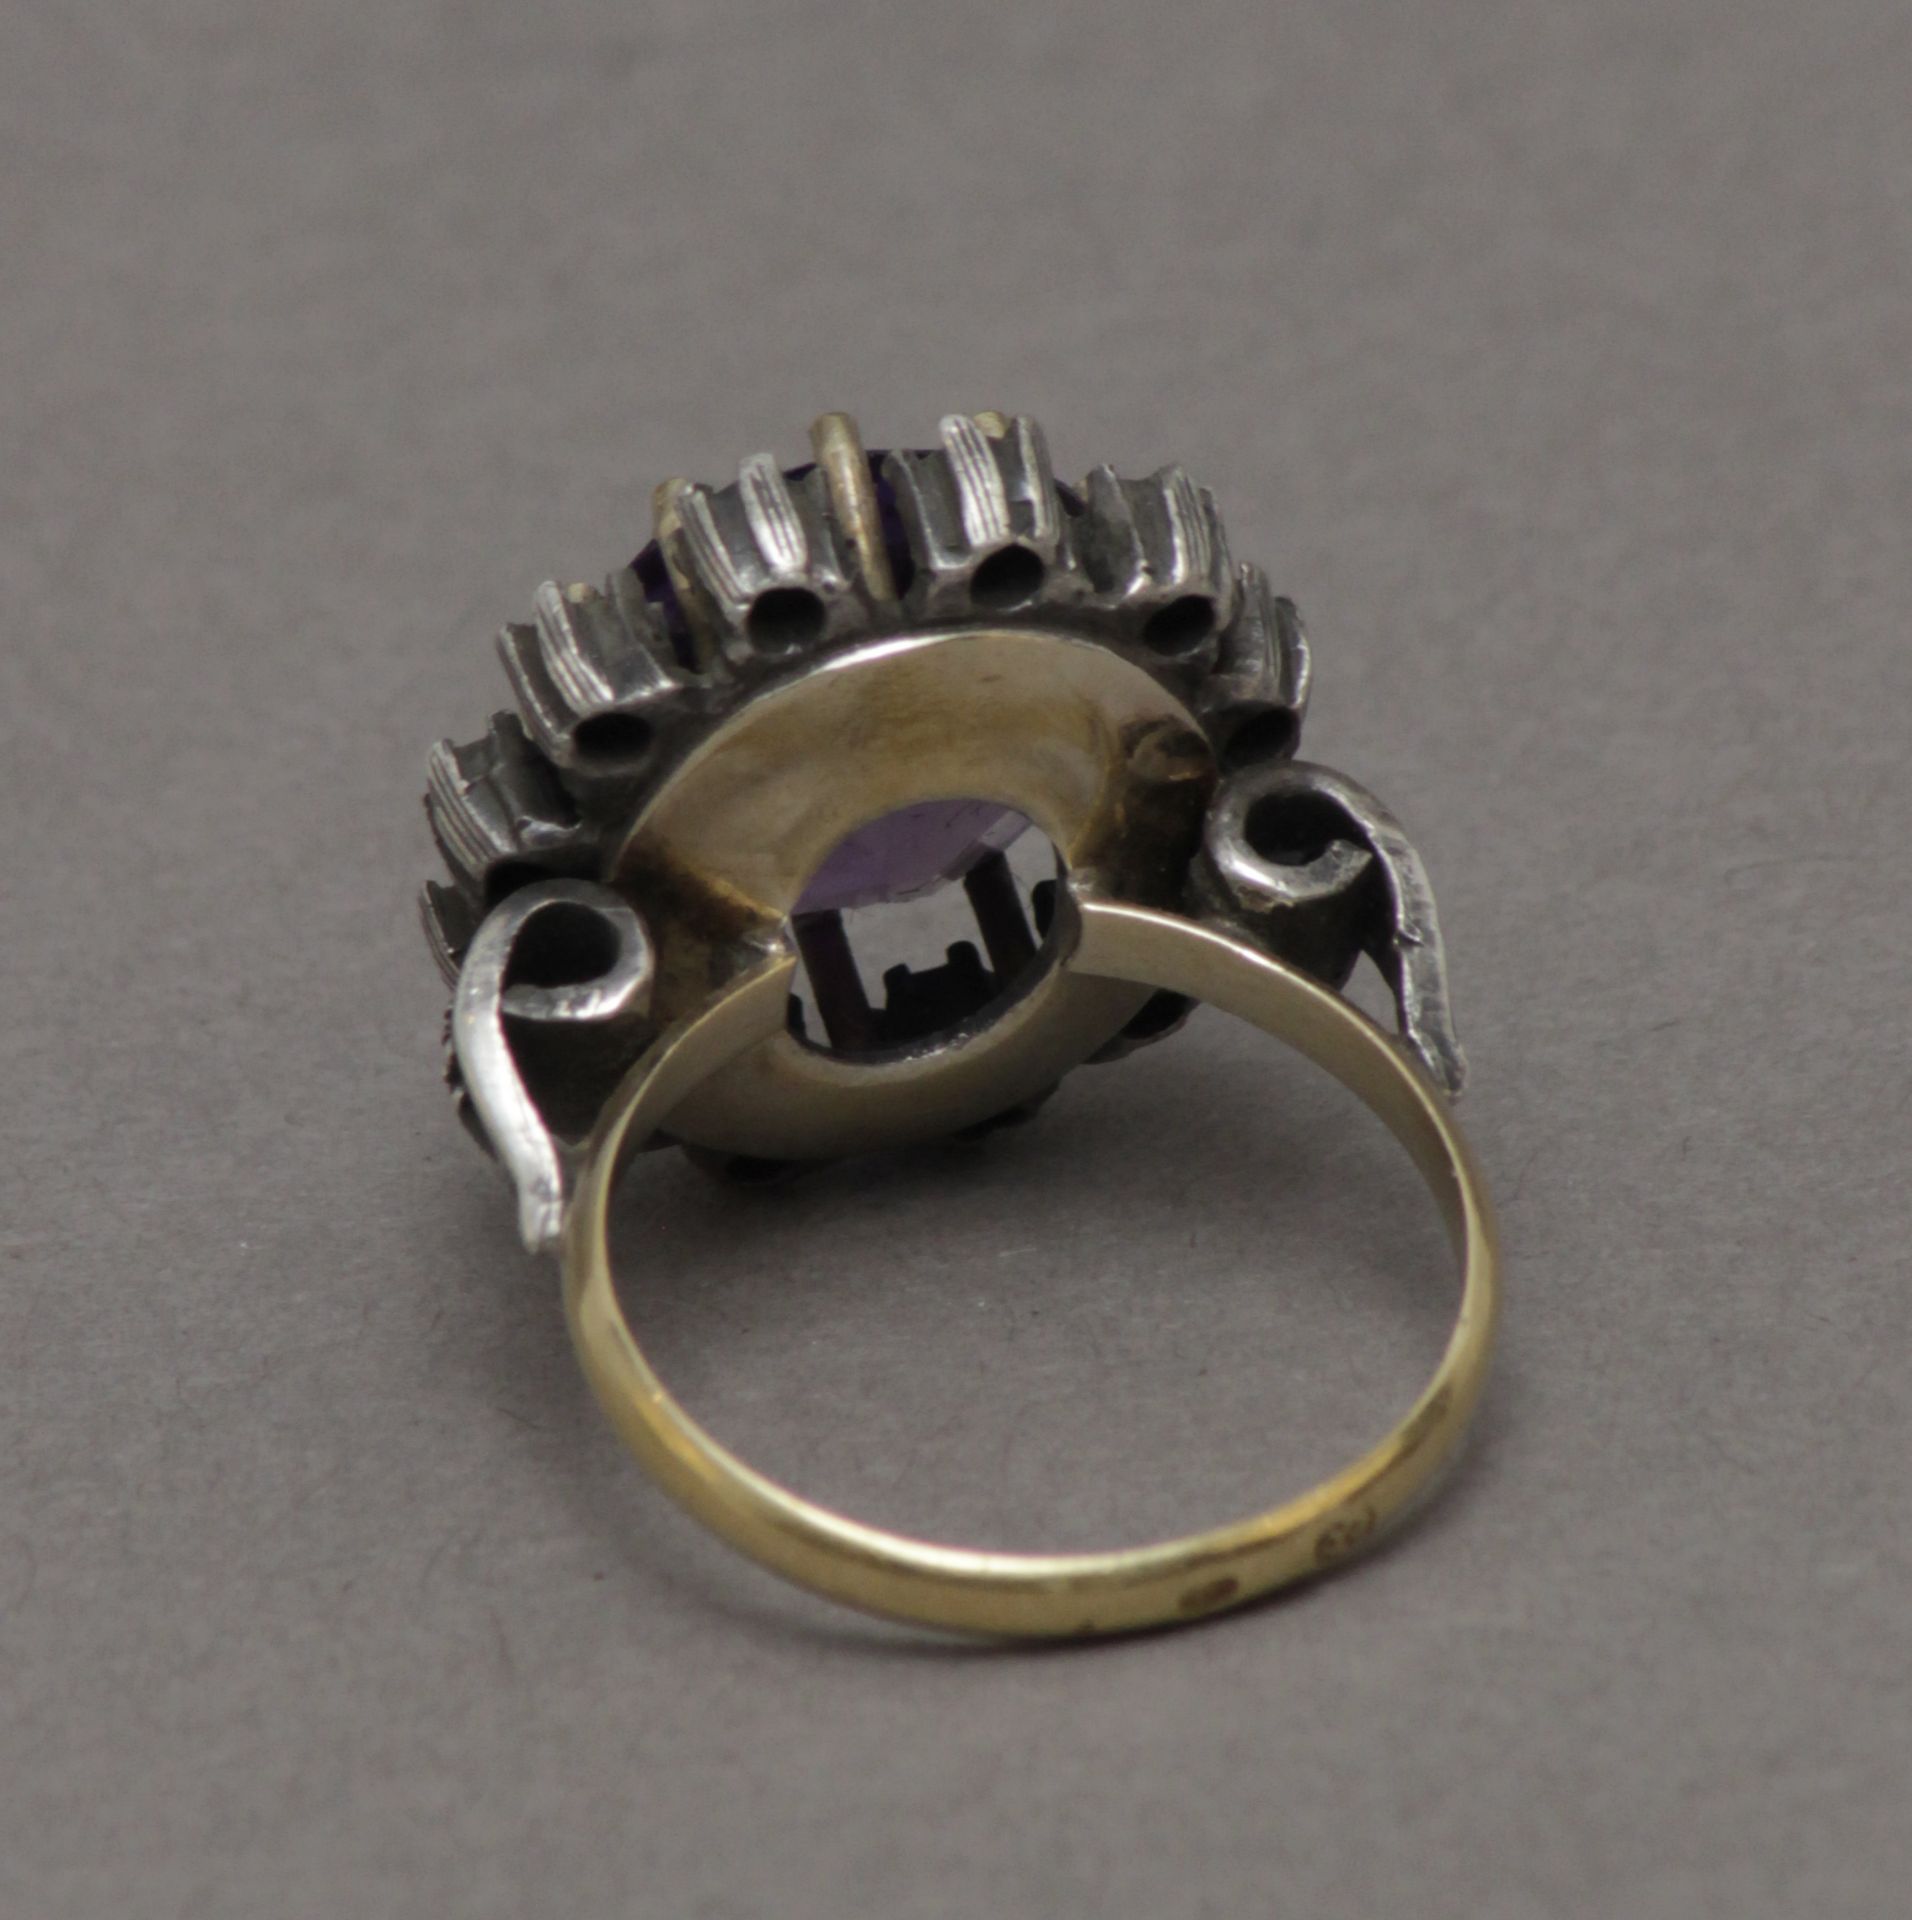 A rose cut diamonds and a rose de France cluster ring circa 1940 - Image 3 of 5